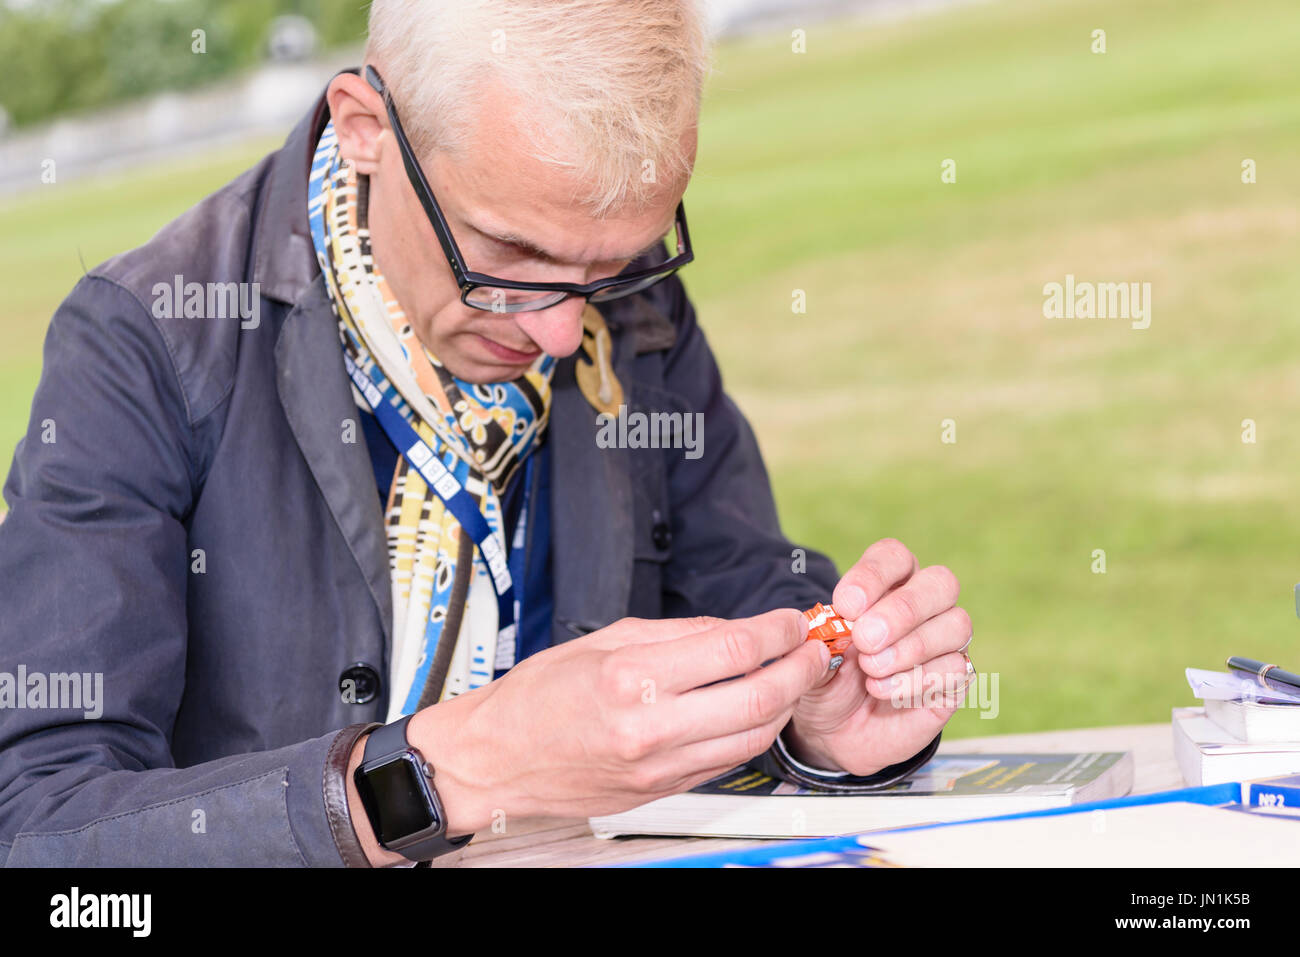 Belfast, Northern Ireland.  29/07/2017 - Antiques expert Mark Hill examines a small toy car as the Antiques Roadshow comes to Stormont Estate. Stock Photo